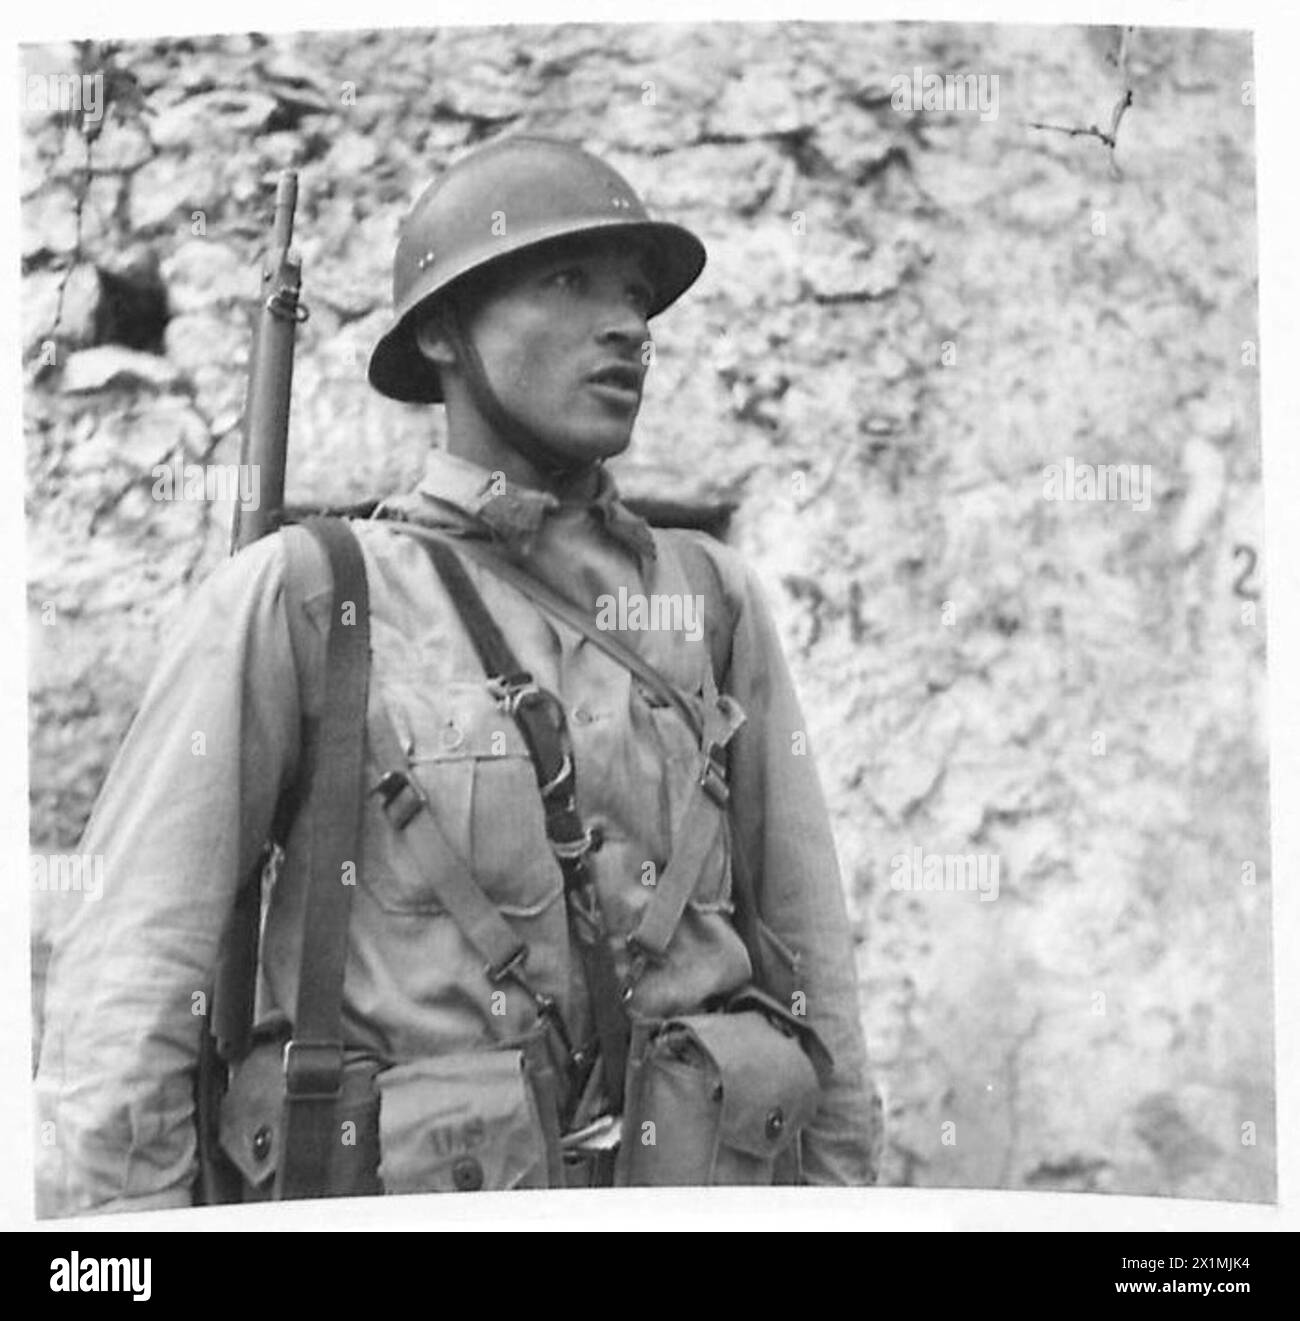 THE 2ND FRENCH MOROCCAN DIVISION COMMANDED BY GENERAL DODY RELIEVE THE 34TH U.S. DIVISION IN THE ITALIAN FRONT LINE - Mohammed Ben-Djillali - Typical Bouazza Ben-Abdesselemb, Moroccans Saiu Ben Azzouz of the 8th Infantry Battalion of the 2nd French Division, British Army Stock Photo